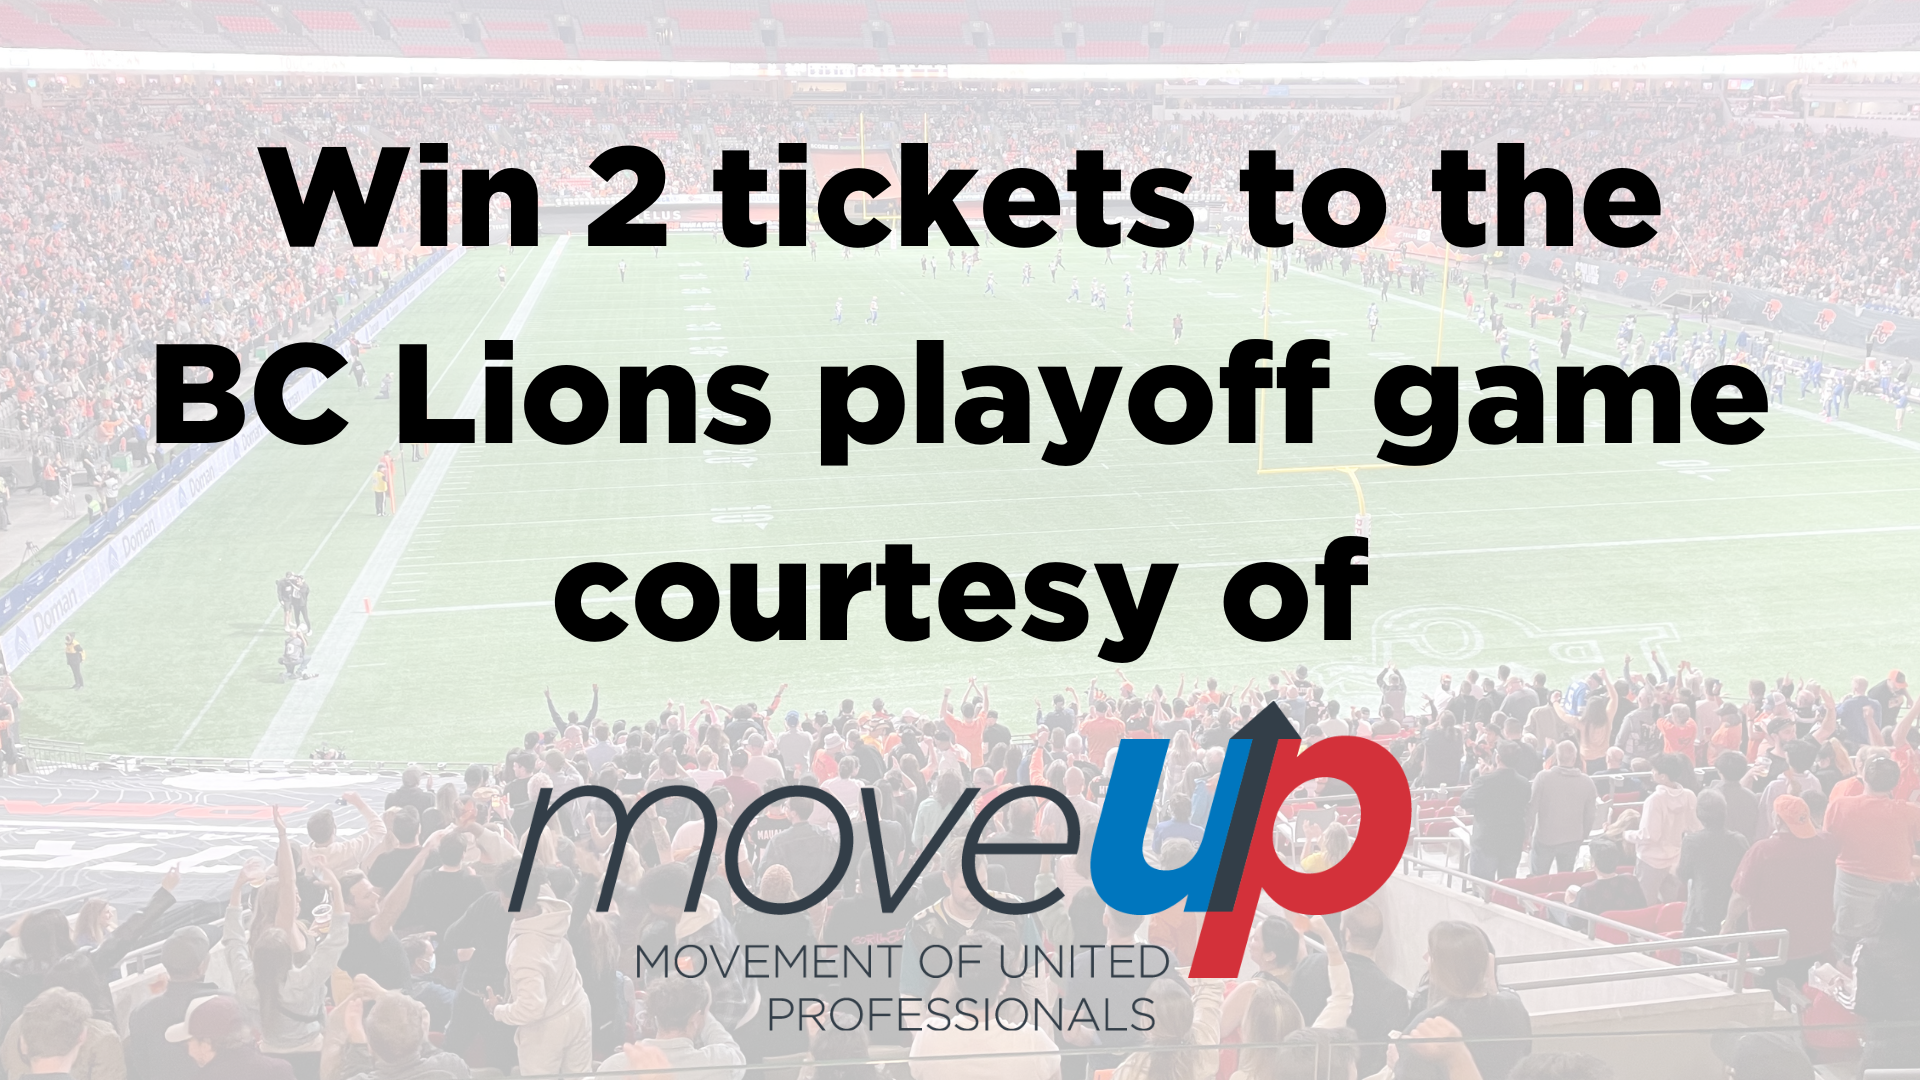 Win 2 tickets to the BC Lions playoff game courtesy of MoveUP